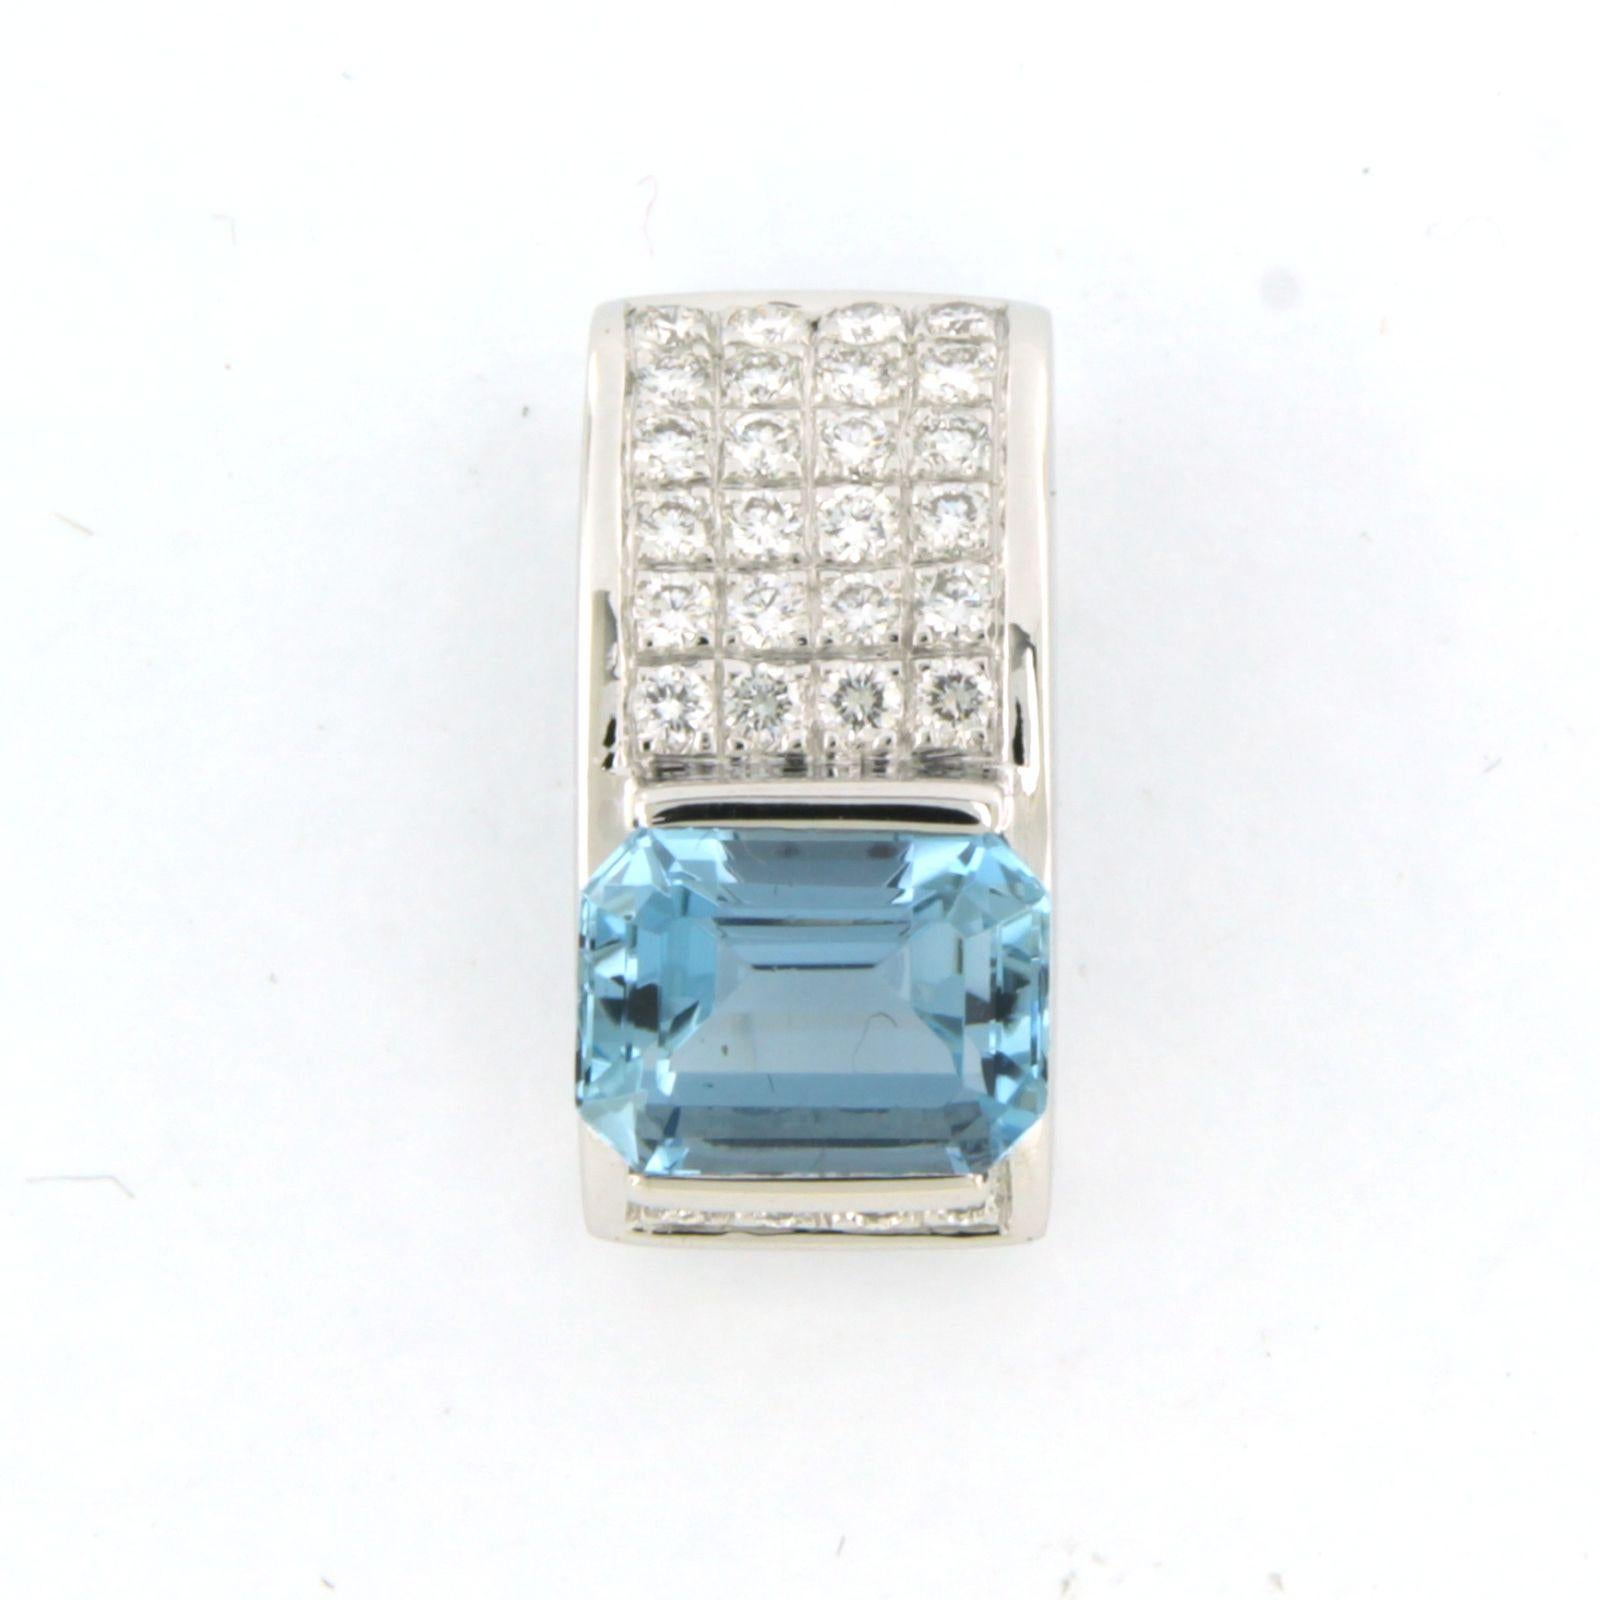 Gübelin - 18k white gold pendant set with blue topaz and brilliant cut diamond. 0.36ct – F/G – VS/SI

Detailed description

the size of the pendant is 1.9 cm long by 9.4 mm wide

weight 5.6 grams

set with

- 1 x 9.0 mm x 6.8 mm emerald shape cut